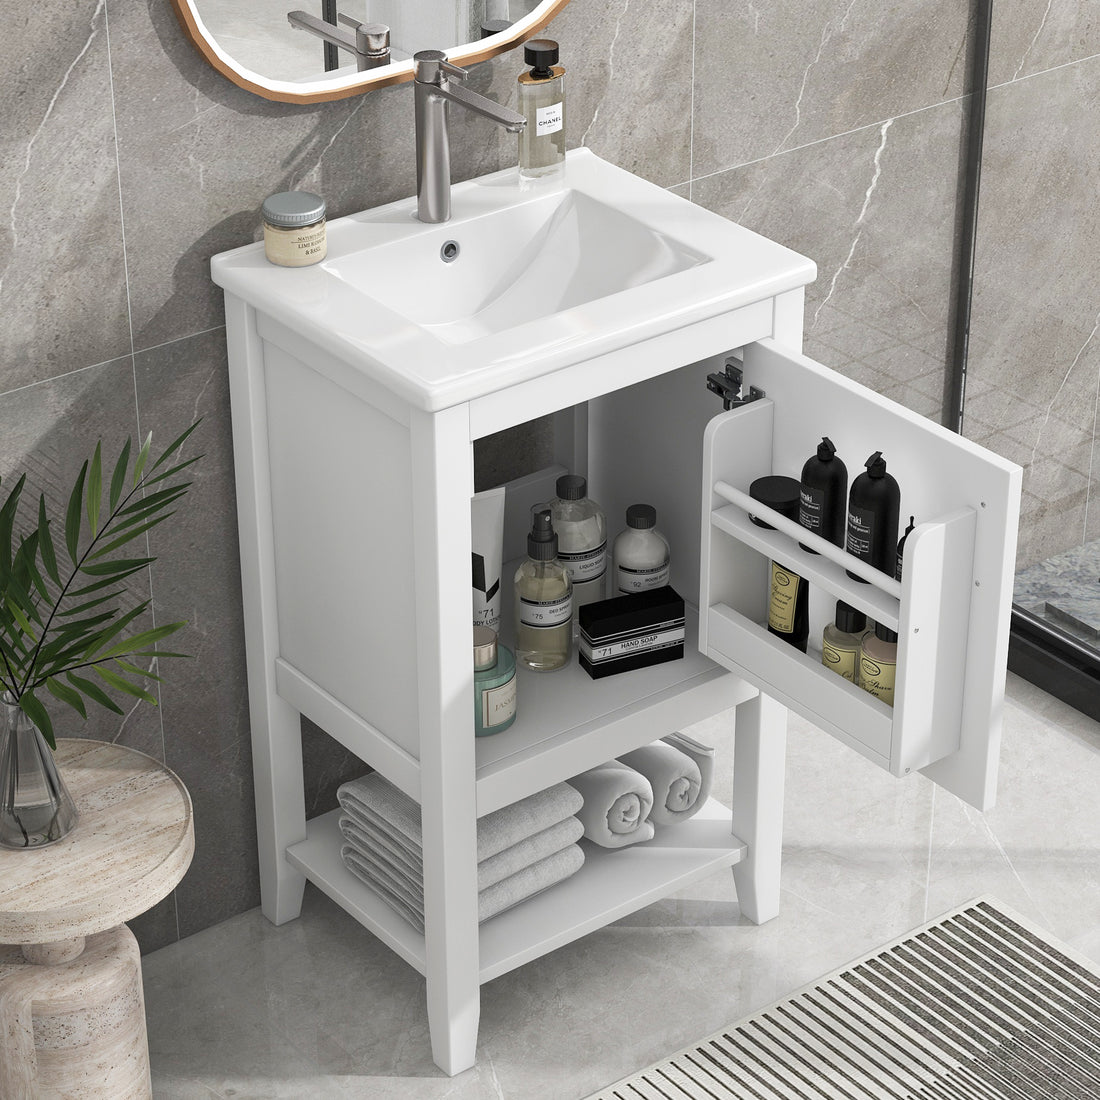 20" Bathroom Vanity with Sink, Bathroom Cabinet with white-solid wood+mdf